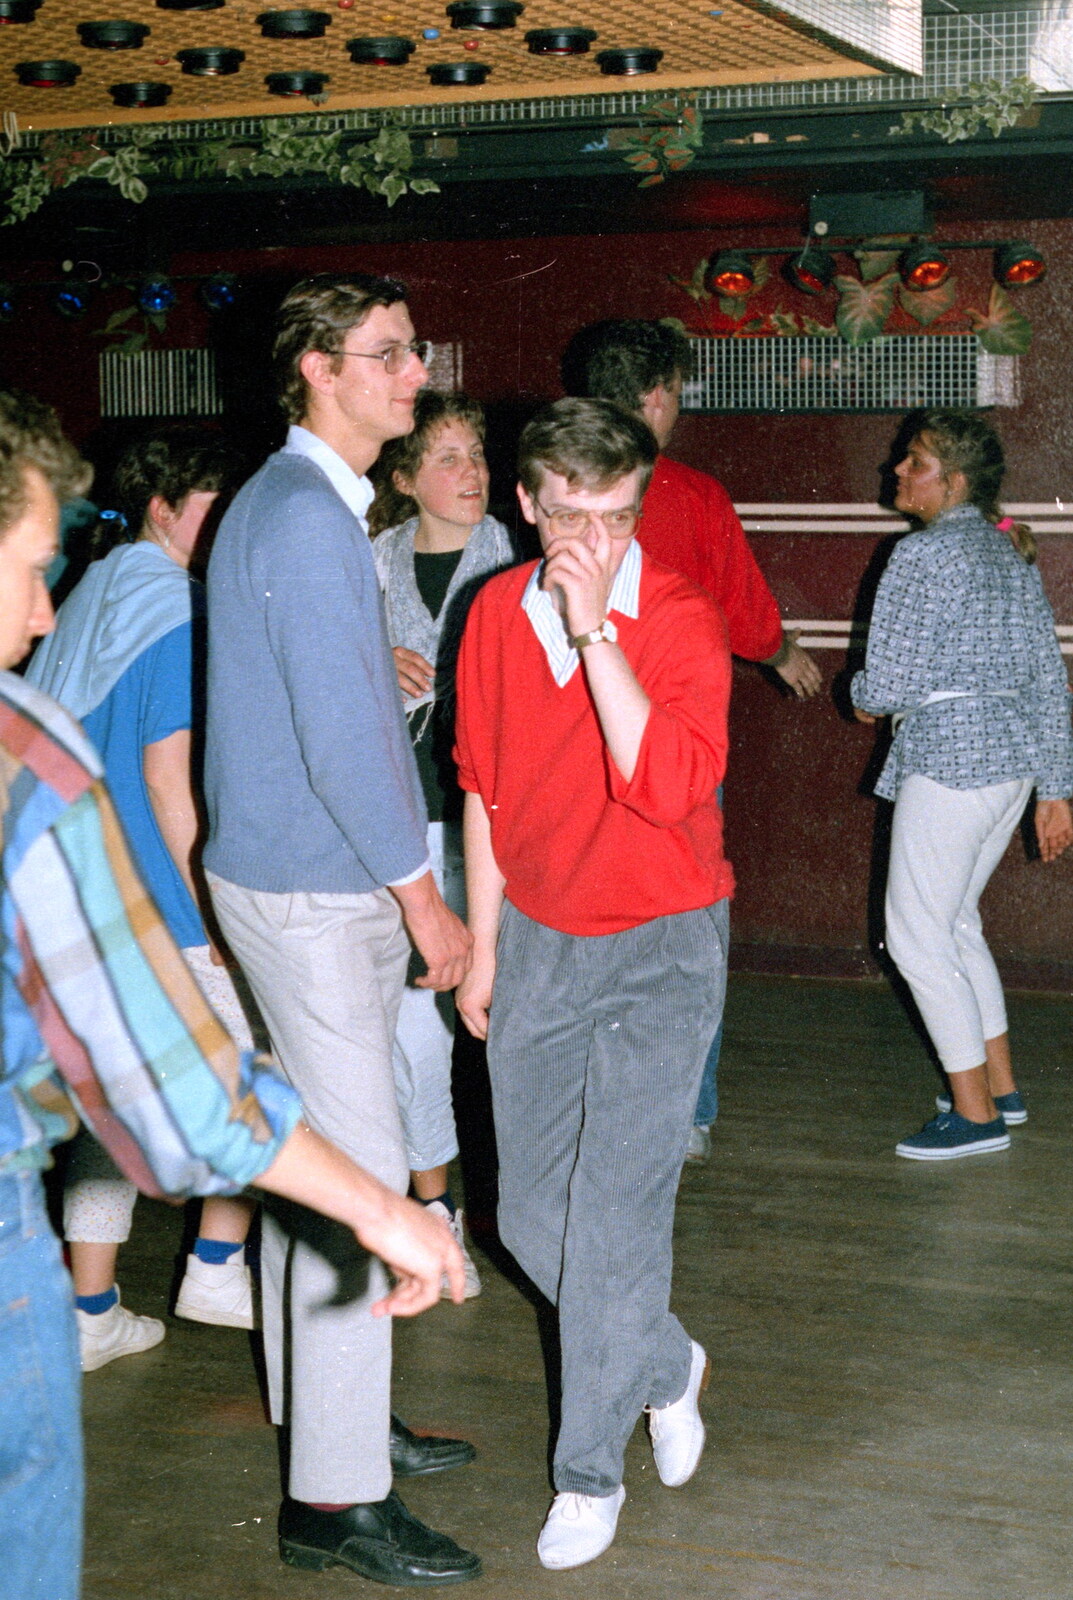 Mike Bey, Andy and Dave bopping away from Uni: Another Session in the James Street Vaults, Plymouth - 15th April 1986